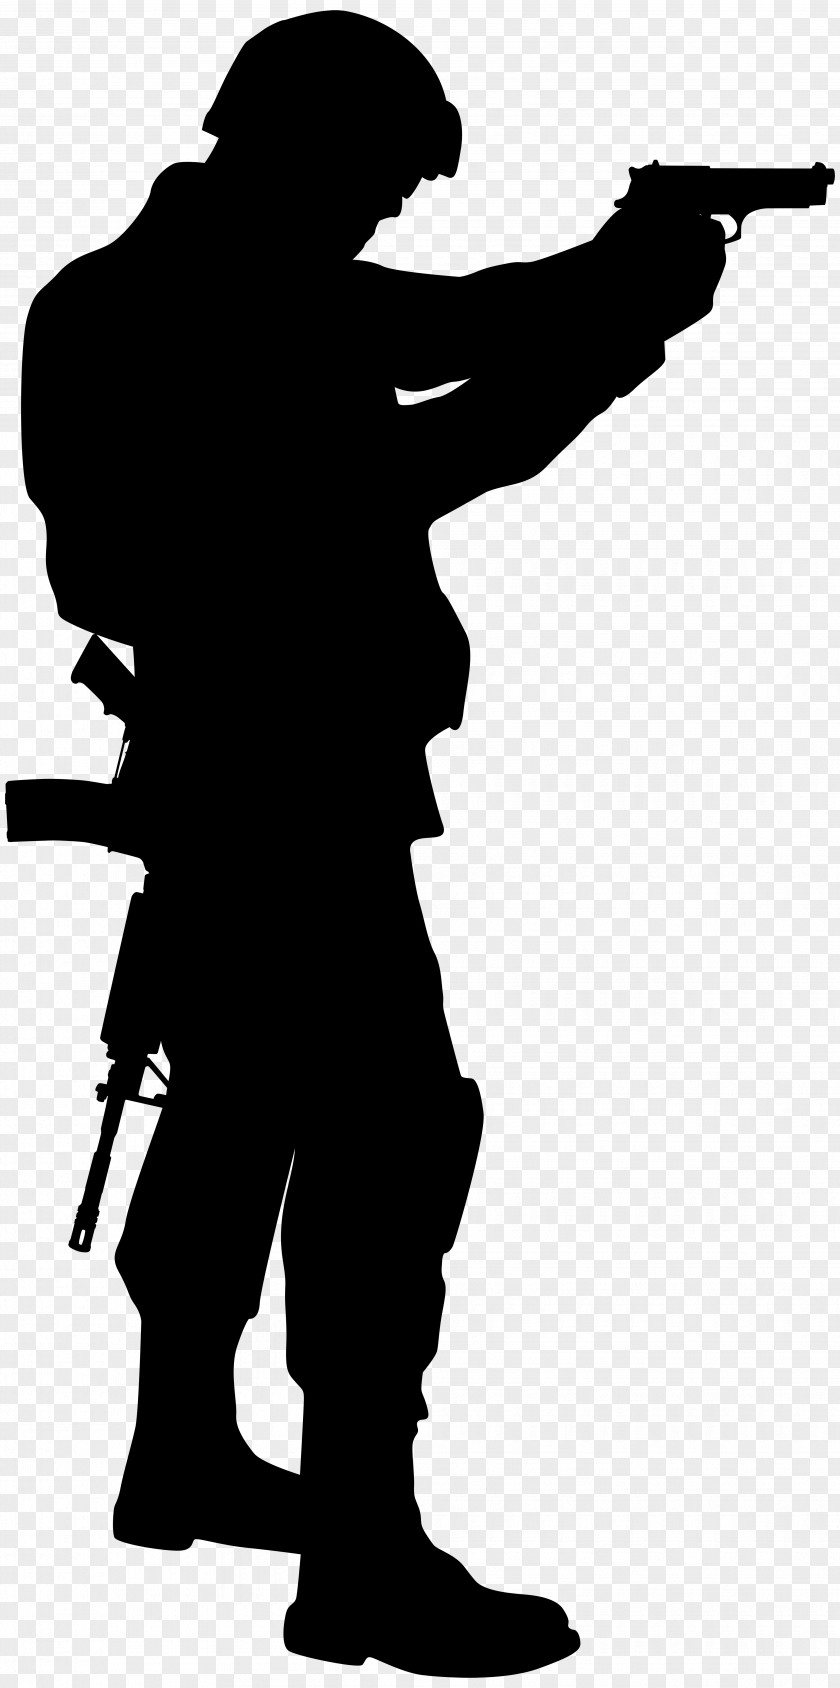 Soldier Silhouette Cliparts Army Clip Art PNG